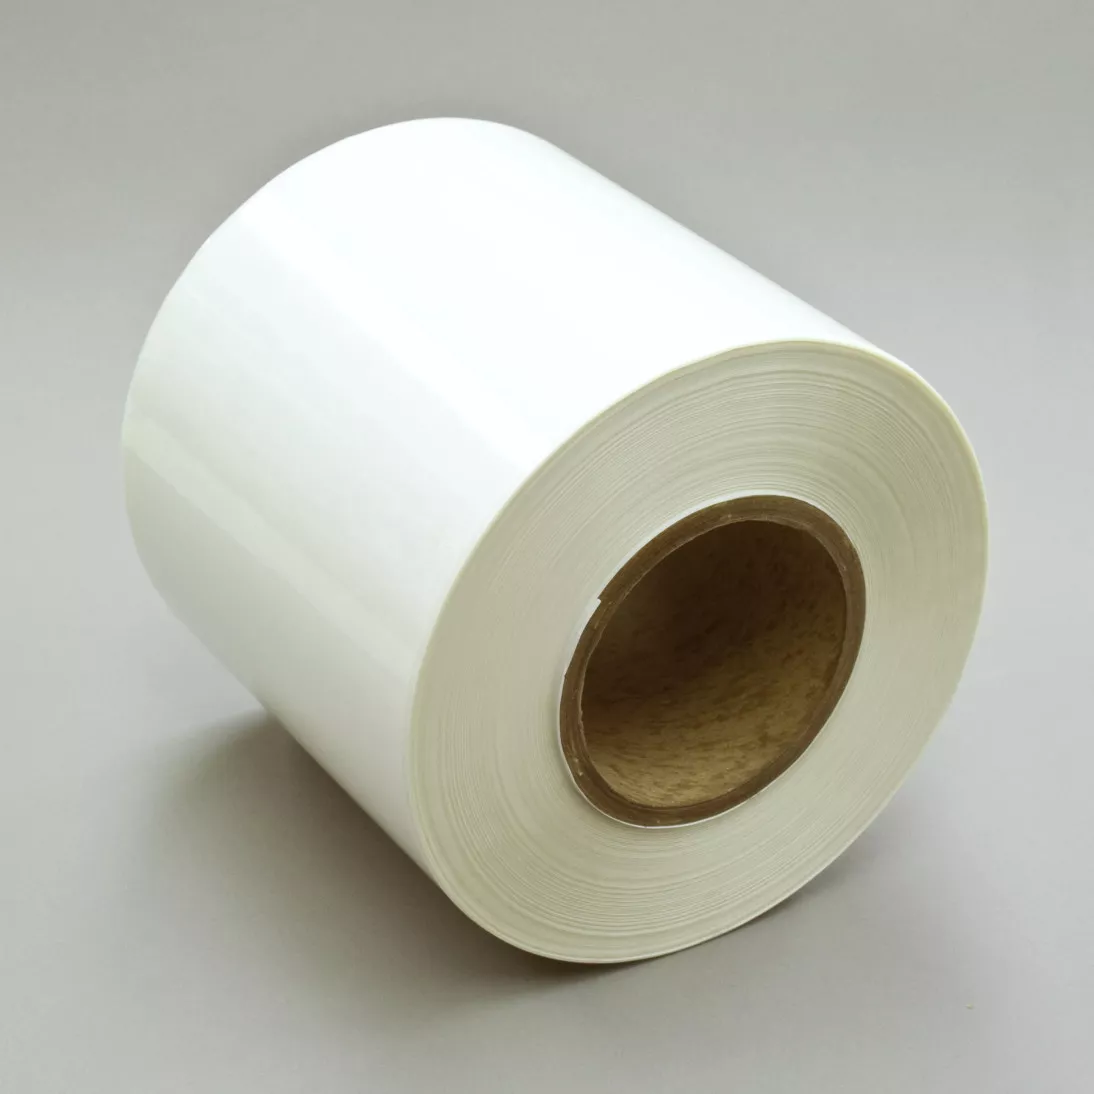 3M™ Thermal Transfer Label Material 7876, Clear Polyester Gloss, 6 in x
1668 ft, 1 roll per case